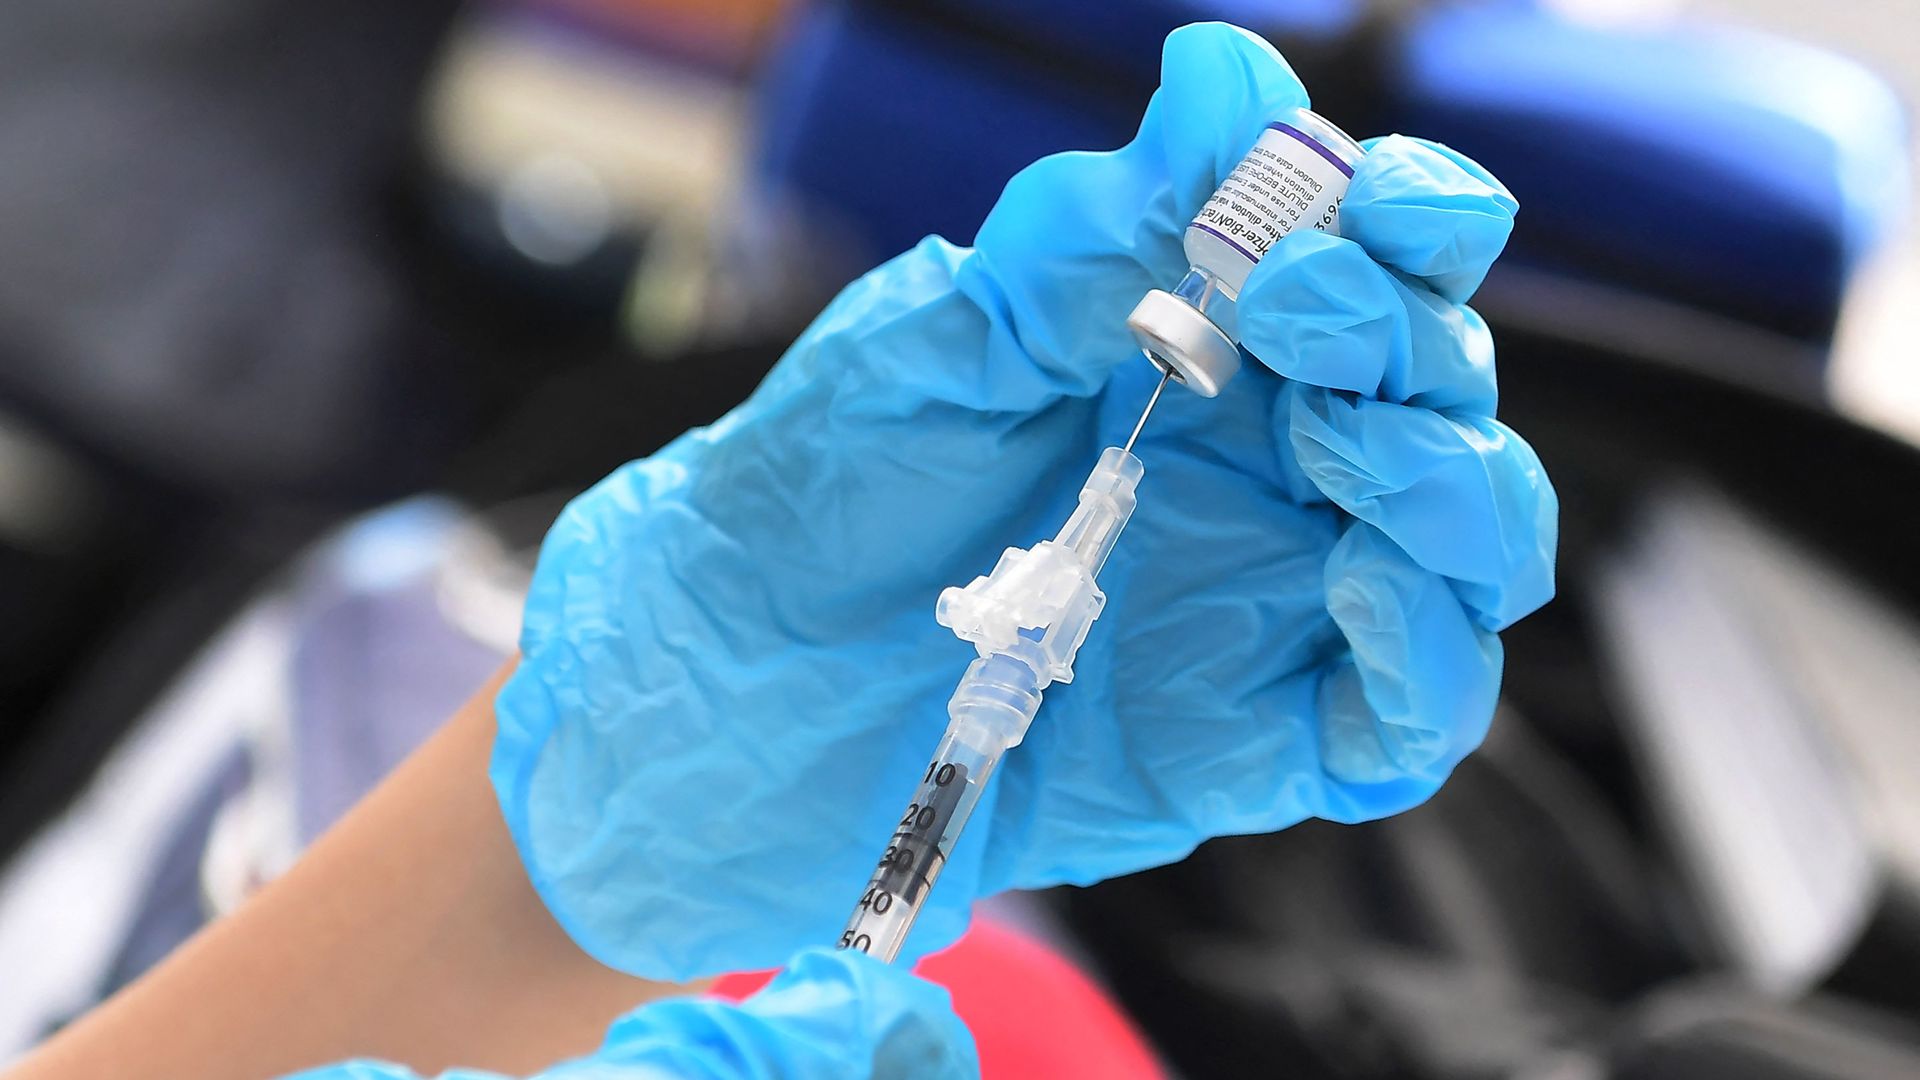 Picture of hands wearing medical gloves holding the Pfizer vaccine and filling up a syringe